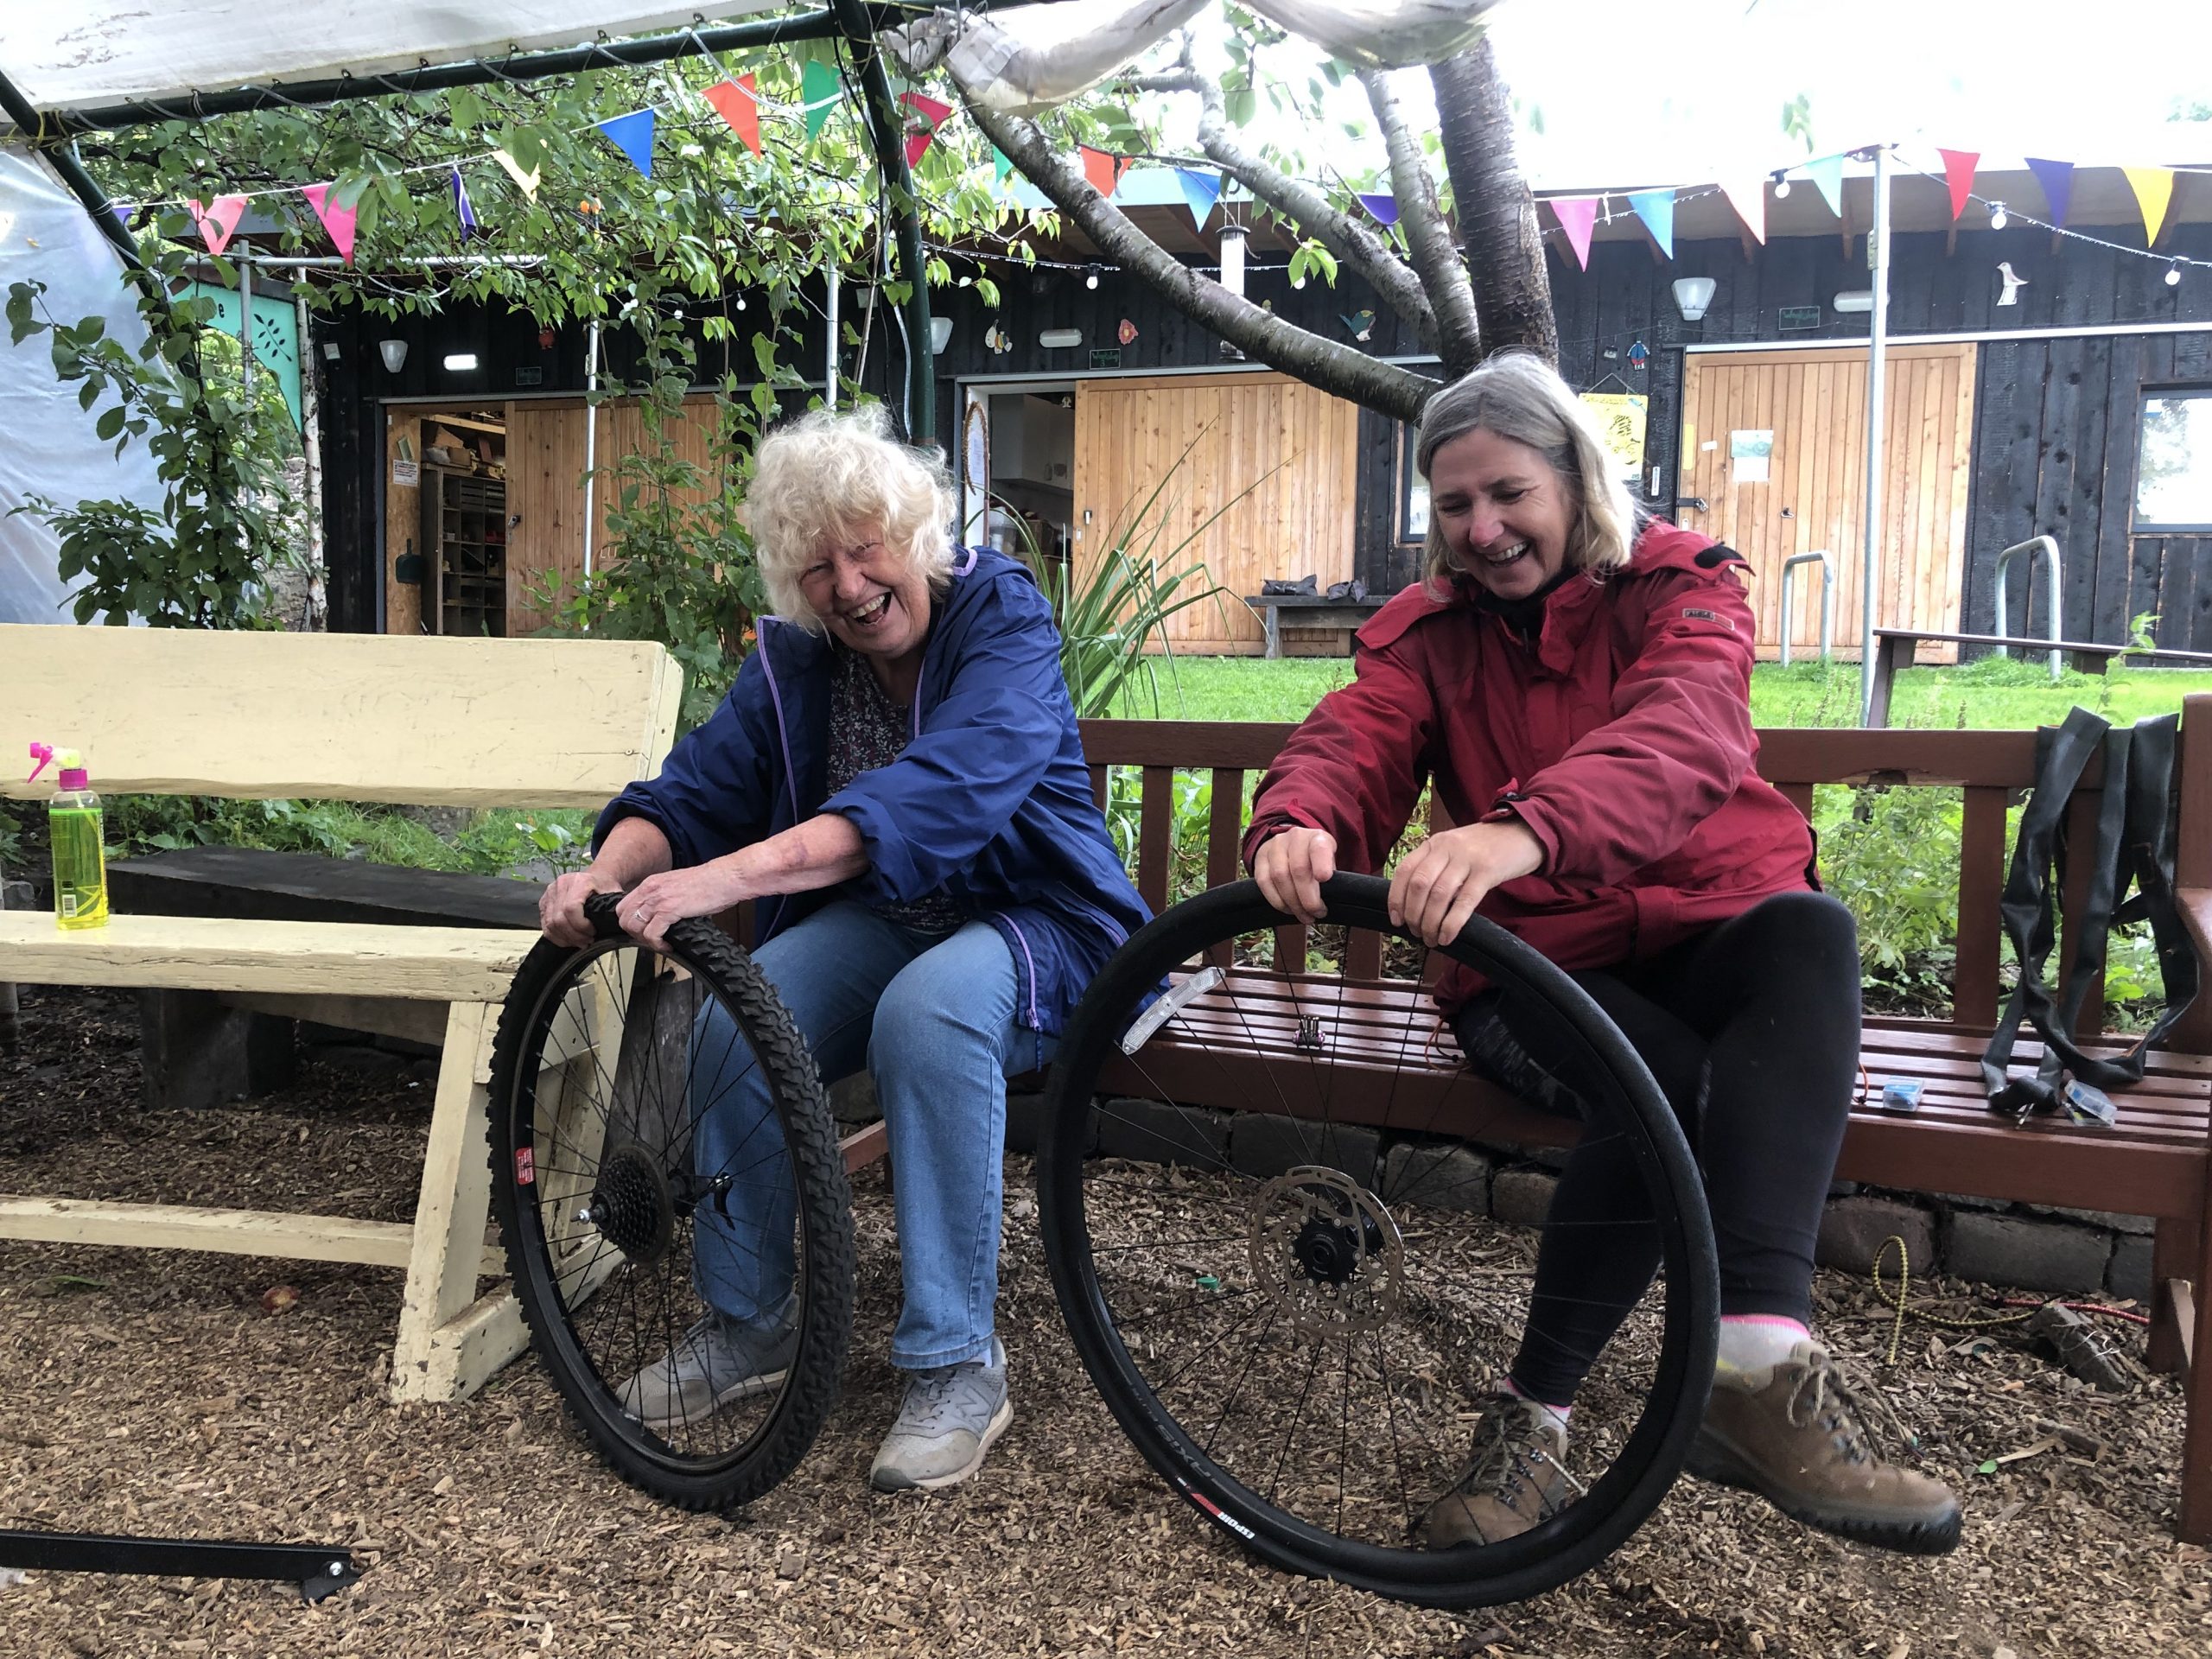 Bridgend Farmhouse Basic bike maintenance class. Image shows two women who are part of a bike maintenance class putting tyres back onto their bicycle wheels